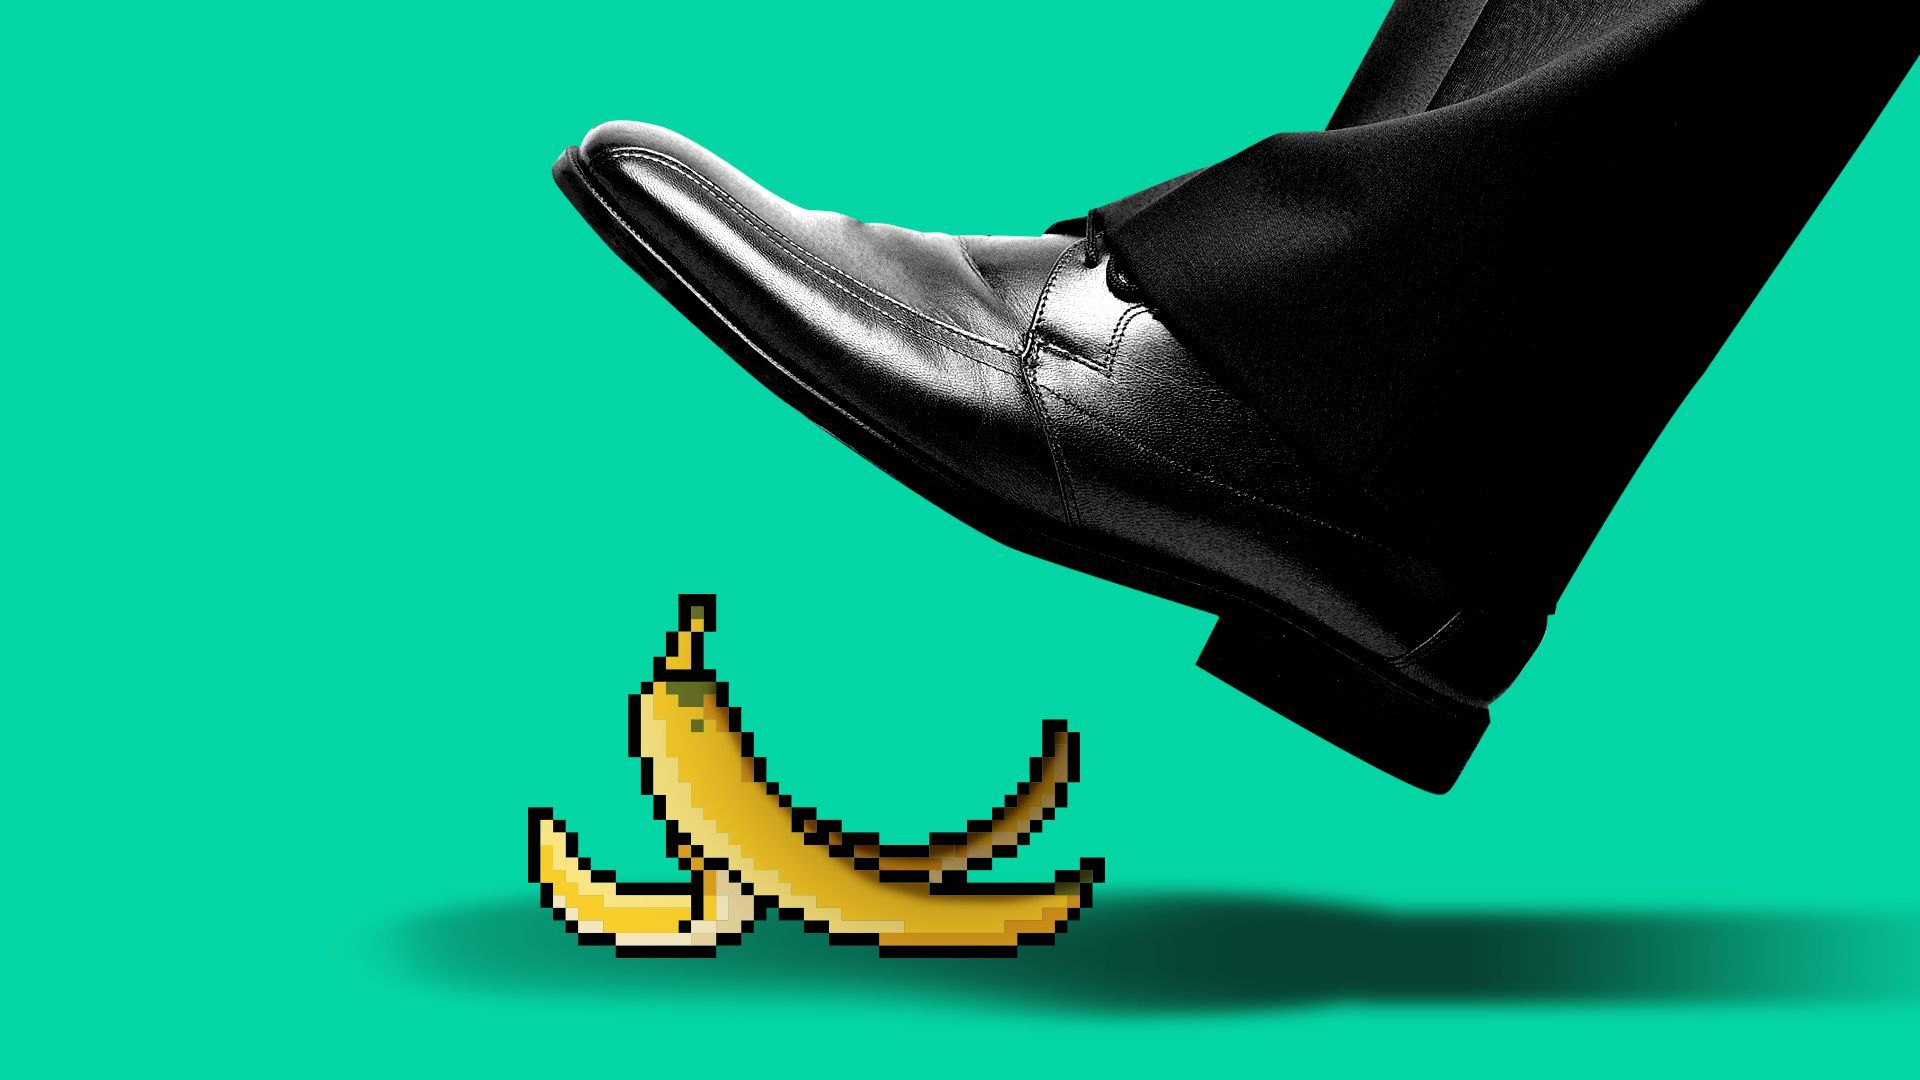 Illustration of a giant foot about to step on a banana peel stylized in an 8-bit art style. 